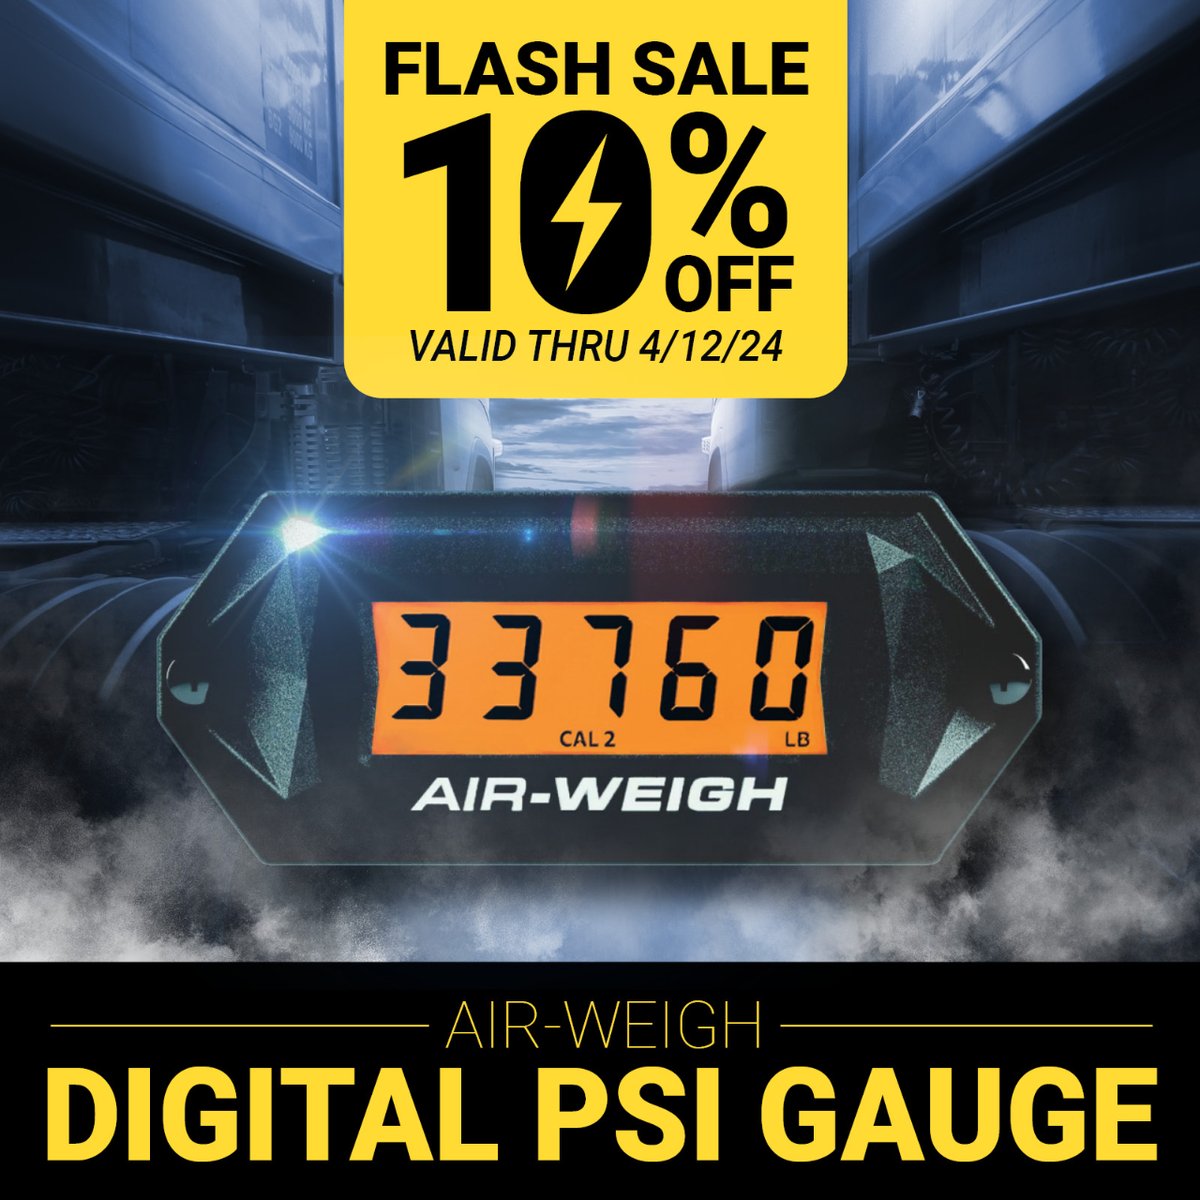 Last day to save 10% on this Digital PSI Gauge!⏳  4statetrucks.com/quick-weigh-di… Sale ends 4/12/2024 at 11:59 p.m. cst.  #4StateTrucks #ChromeShopMafia #chromeshop #semitrucks #trucking #bigrig #18wheeler #truckers #diesel #airweigh